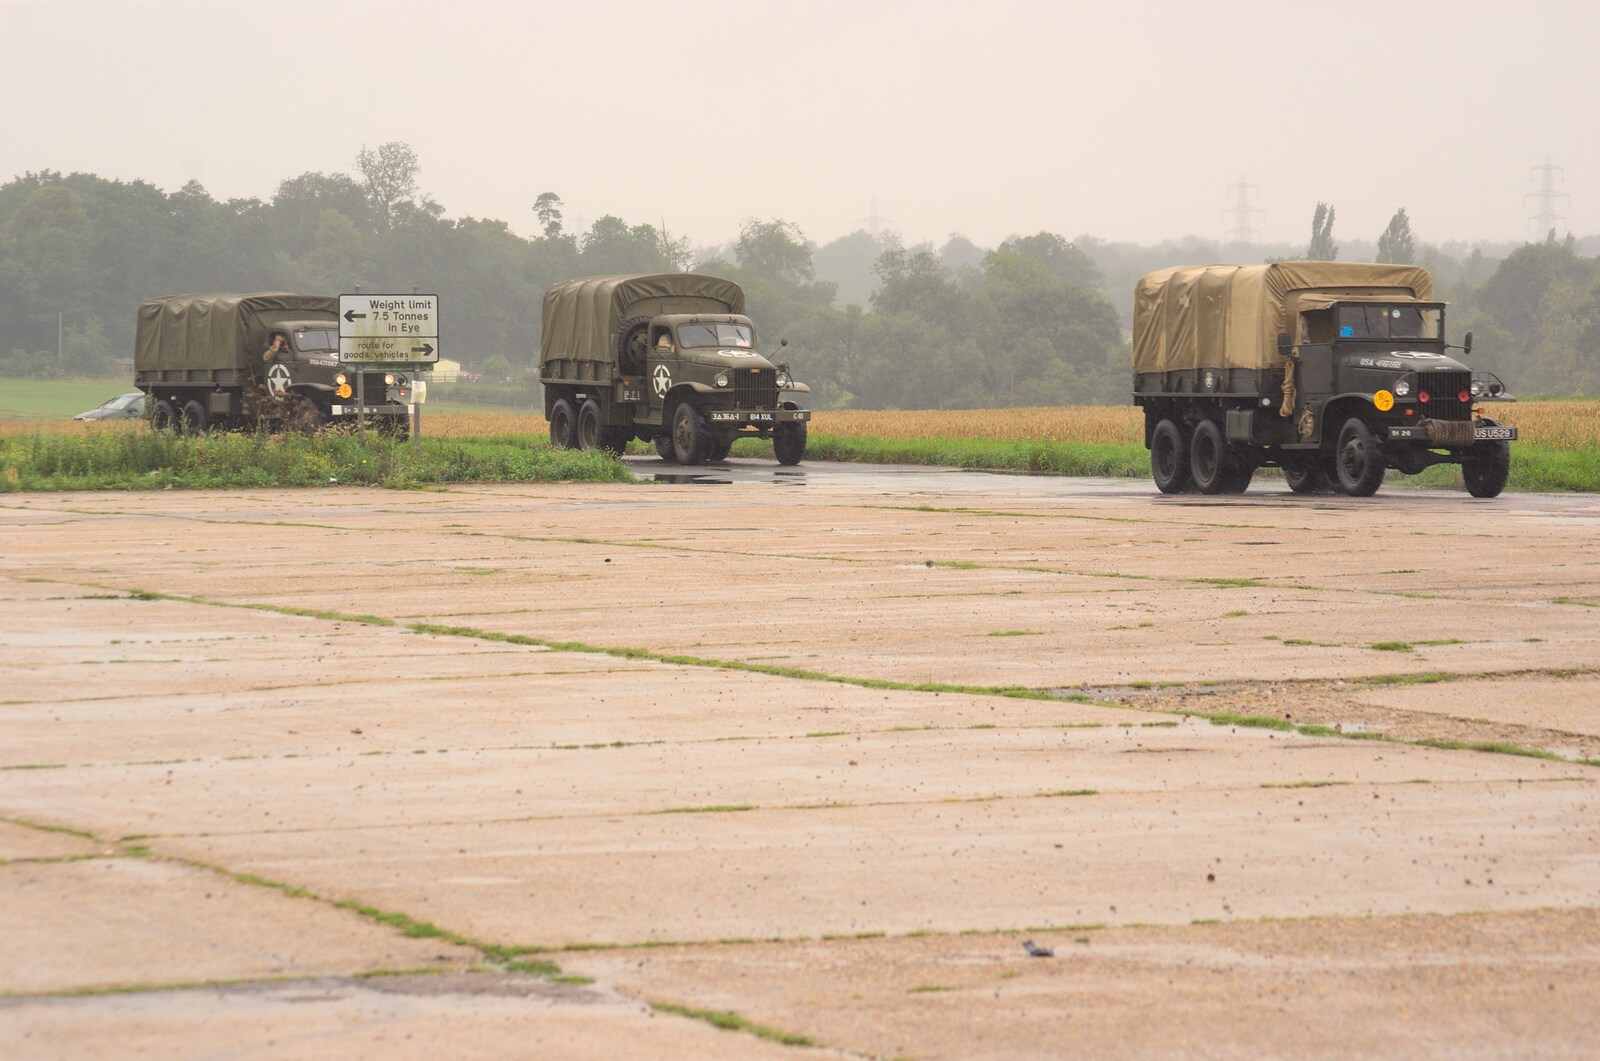 More trucks arrive from Clive's Military Vehicle Convoy, Brome Aerodrome, Suffolk - 16th July 2011